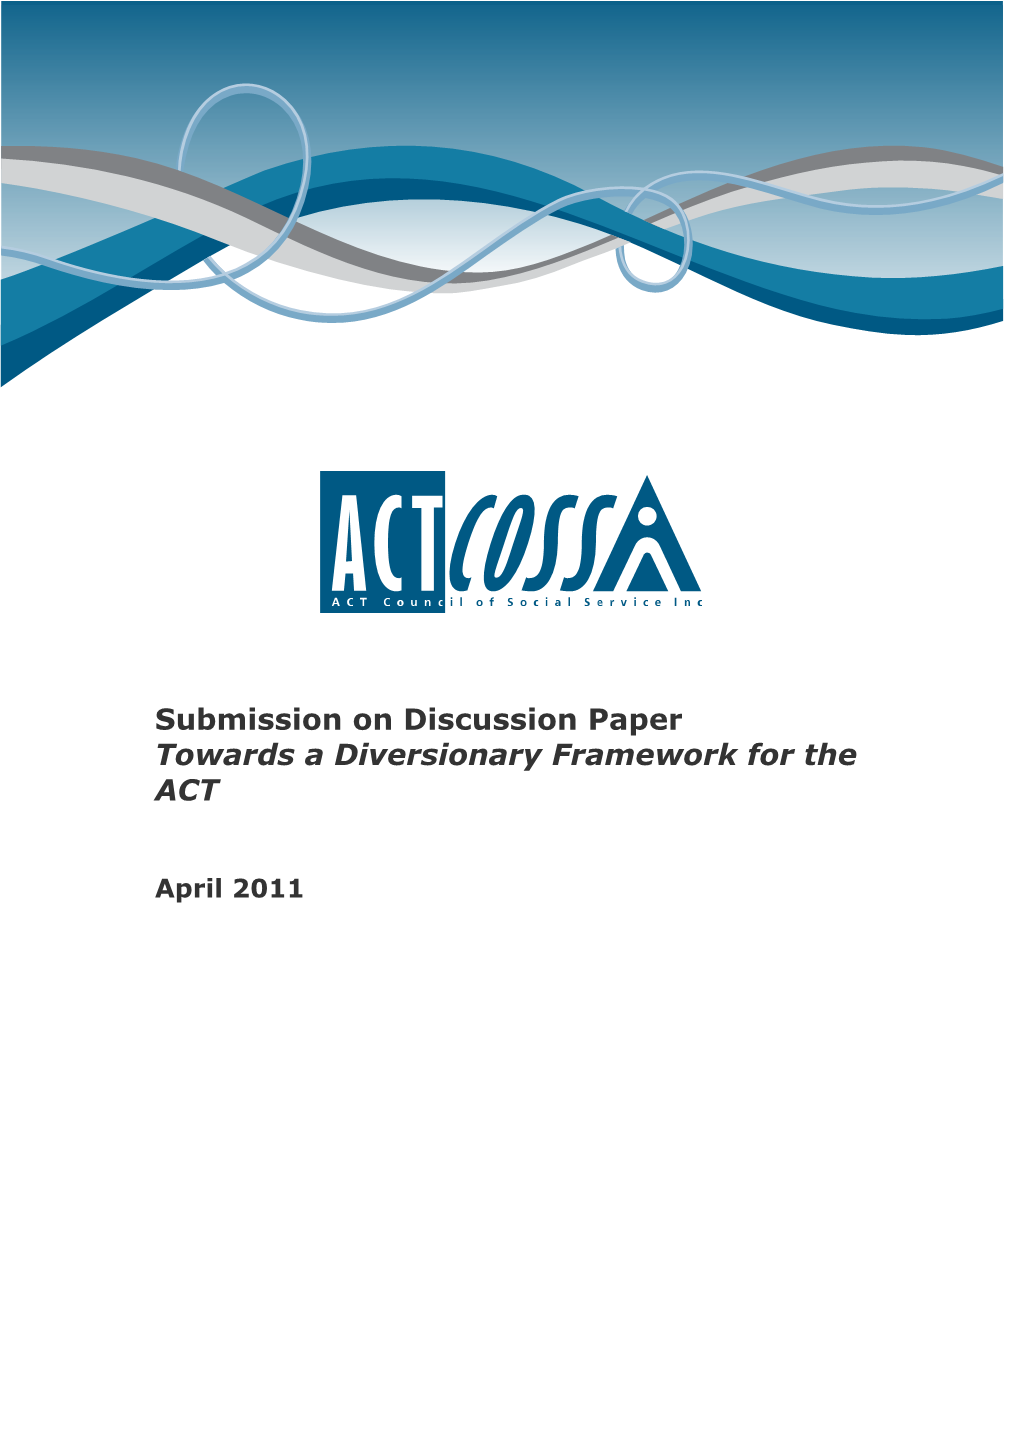 Towards a Diversionary Framework for the ACT